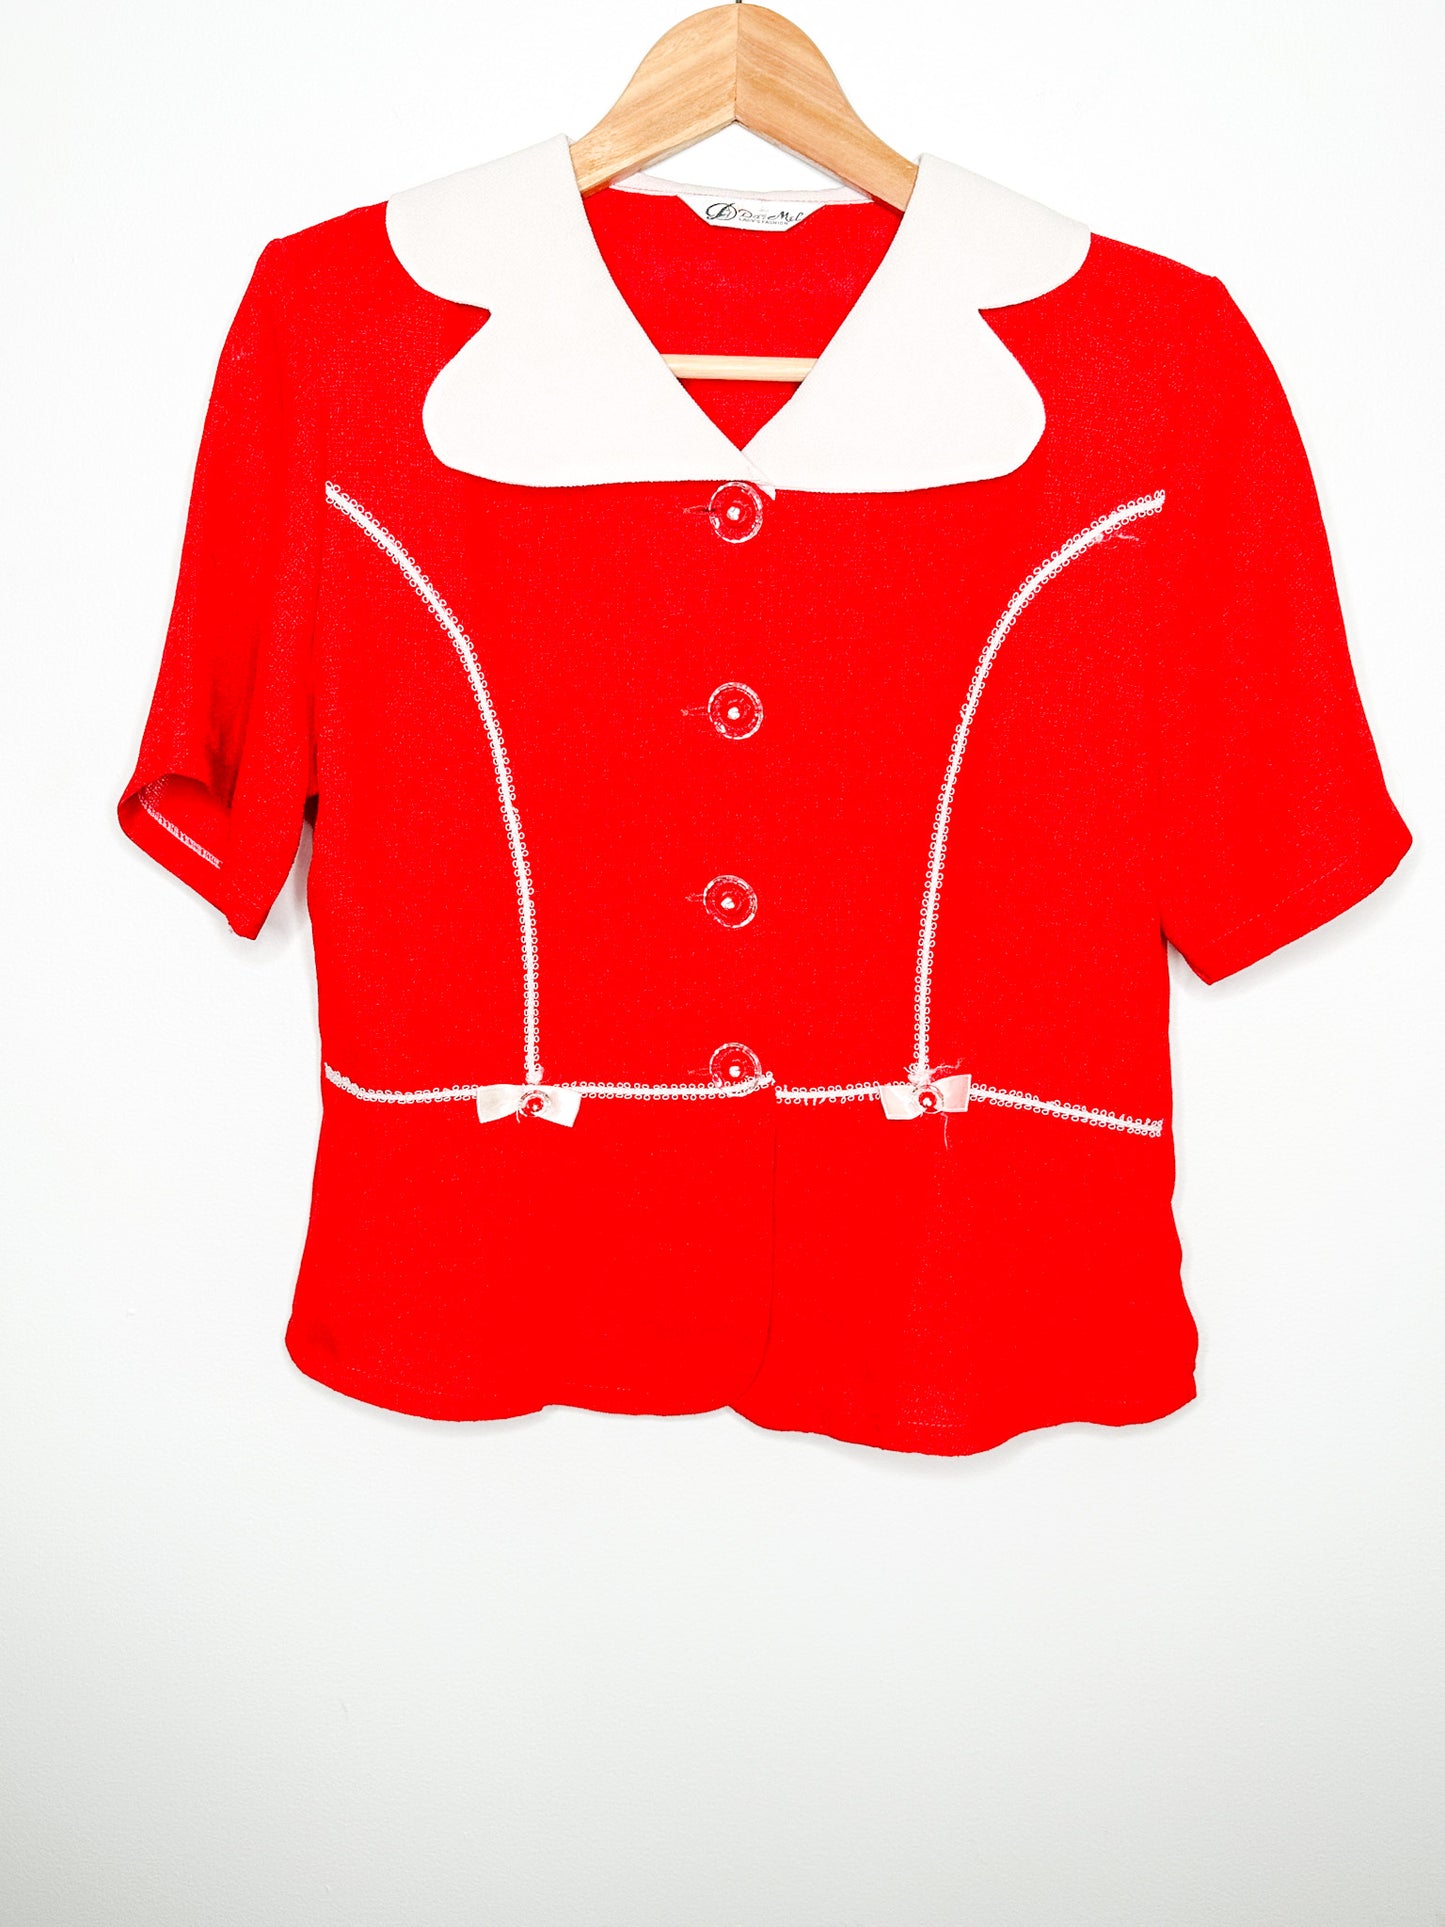 Vintage DareMel Lady's Fashion Red and White Peplum Blouse with lace detailing